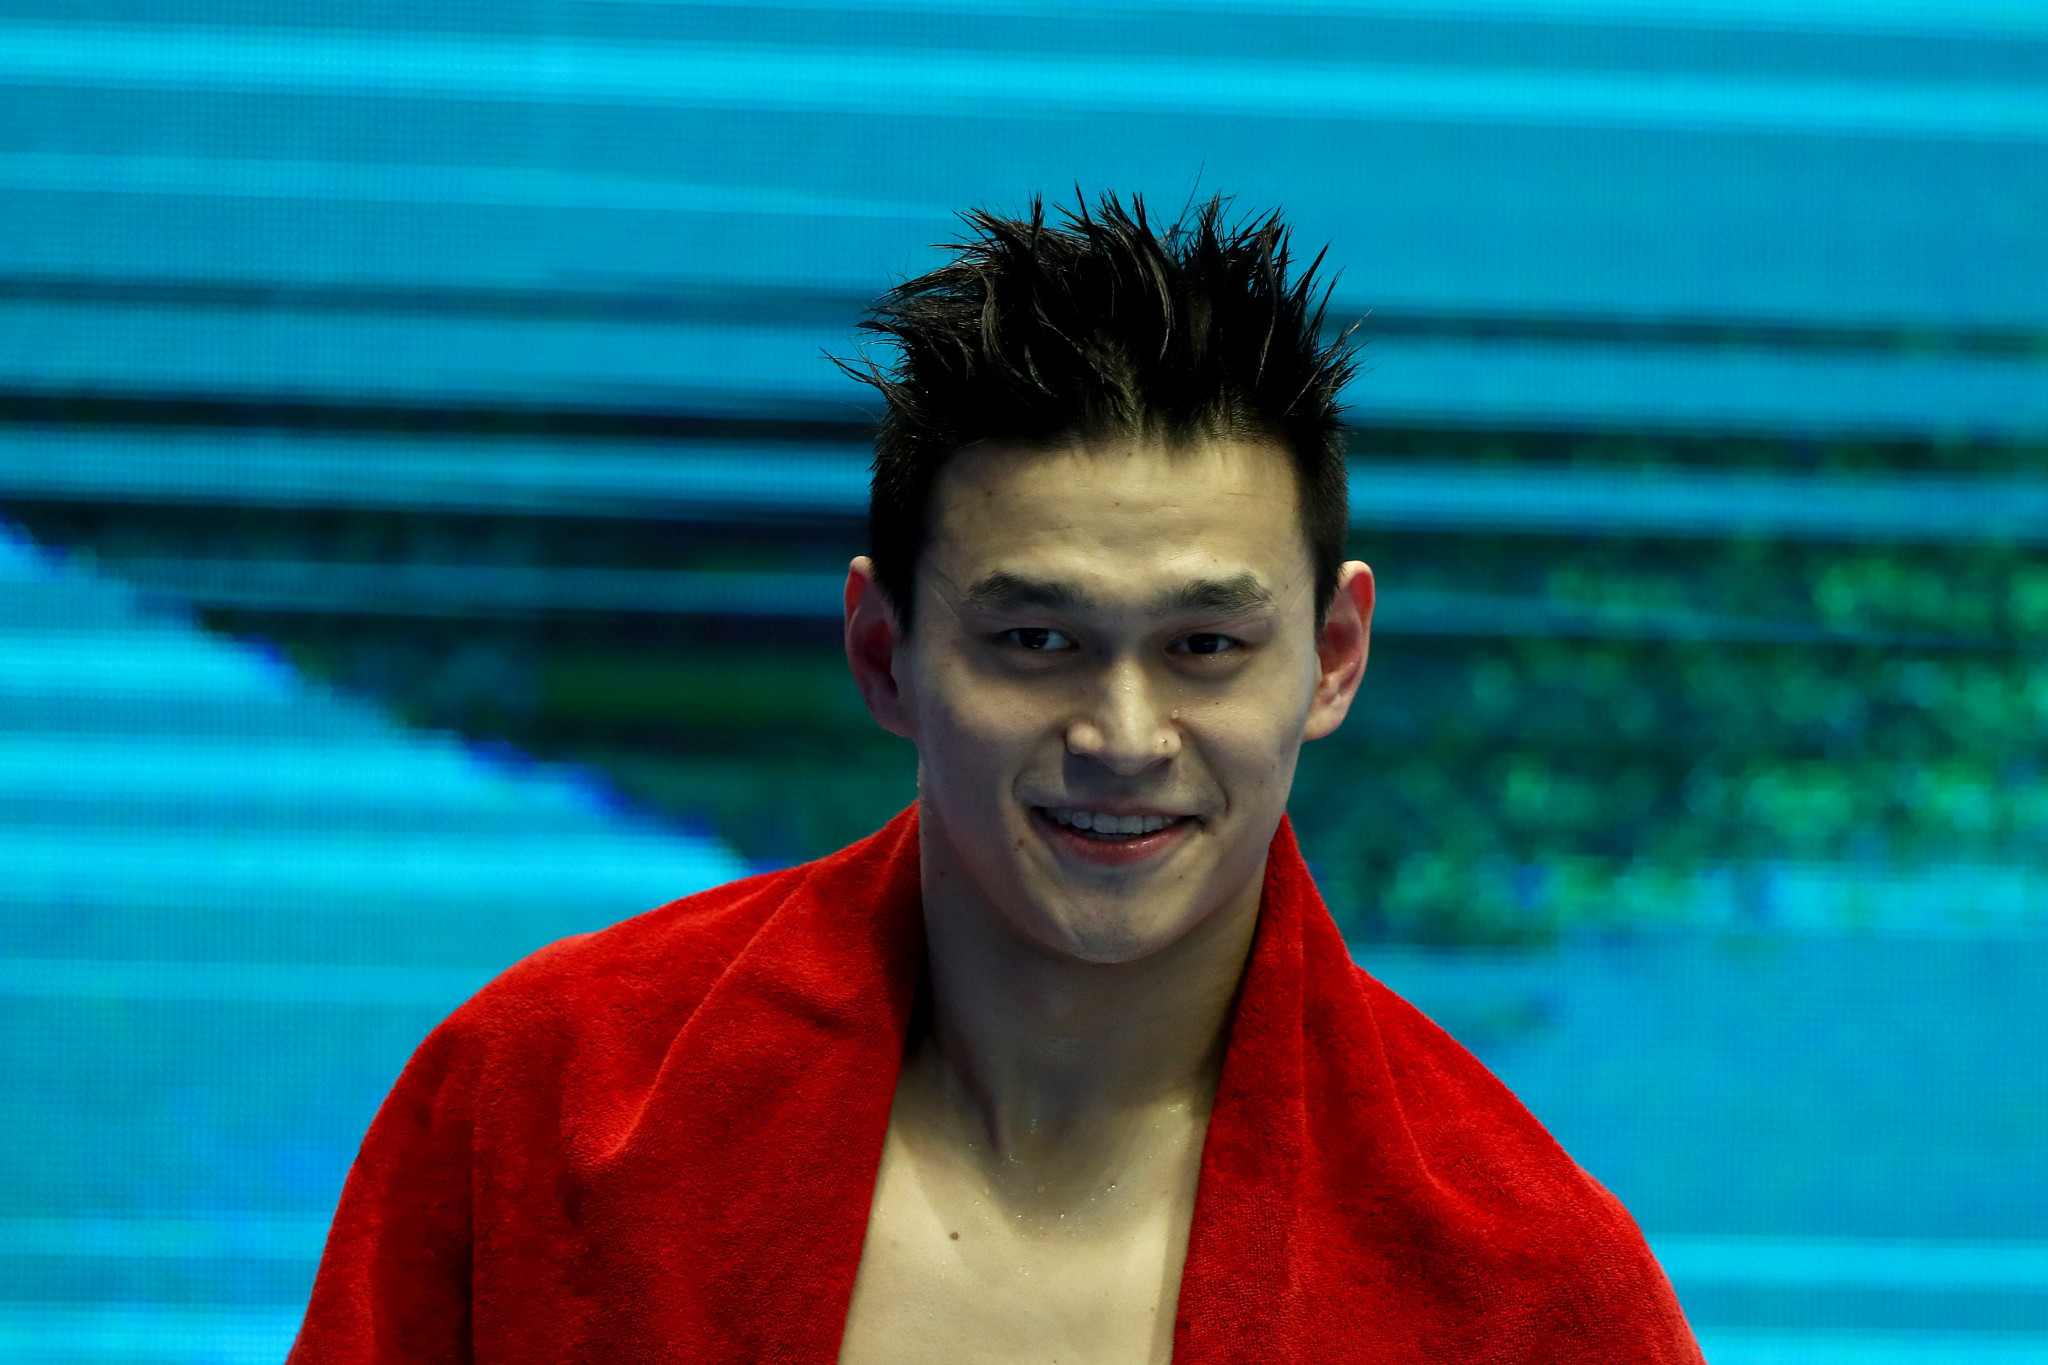 FINA's stance over the now-suspended Sun Yang was criticised in September 2018 when its panel cleared him of an anti-doping rule violation. A Reform Committee was formed after the election of Husain Al-Musallam as FINA President this June ©Getty Images